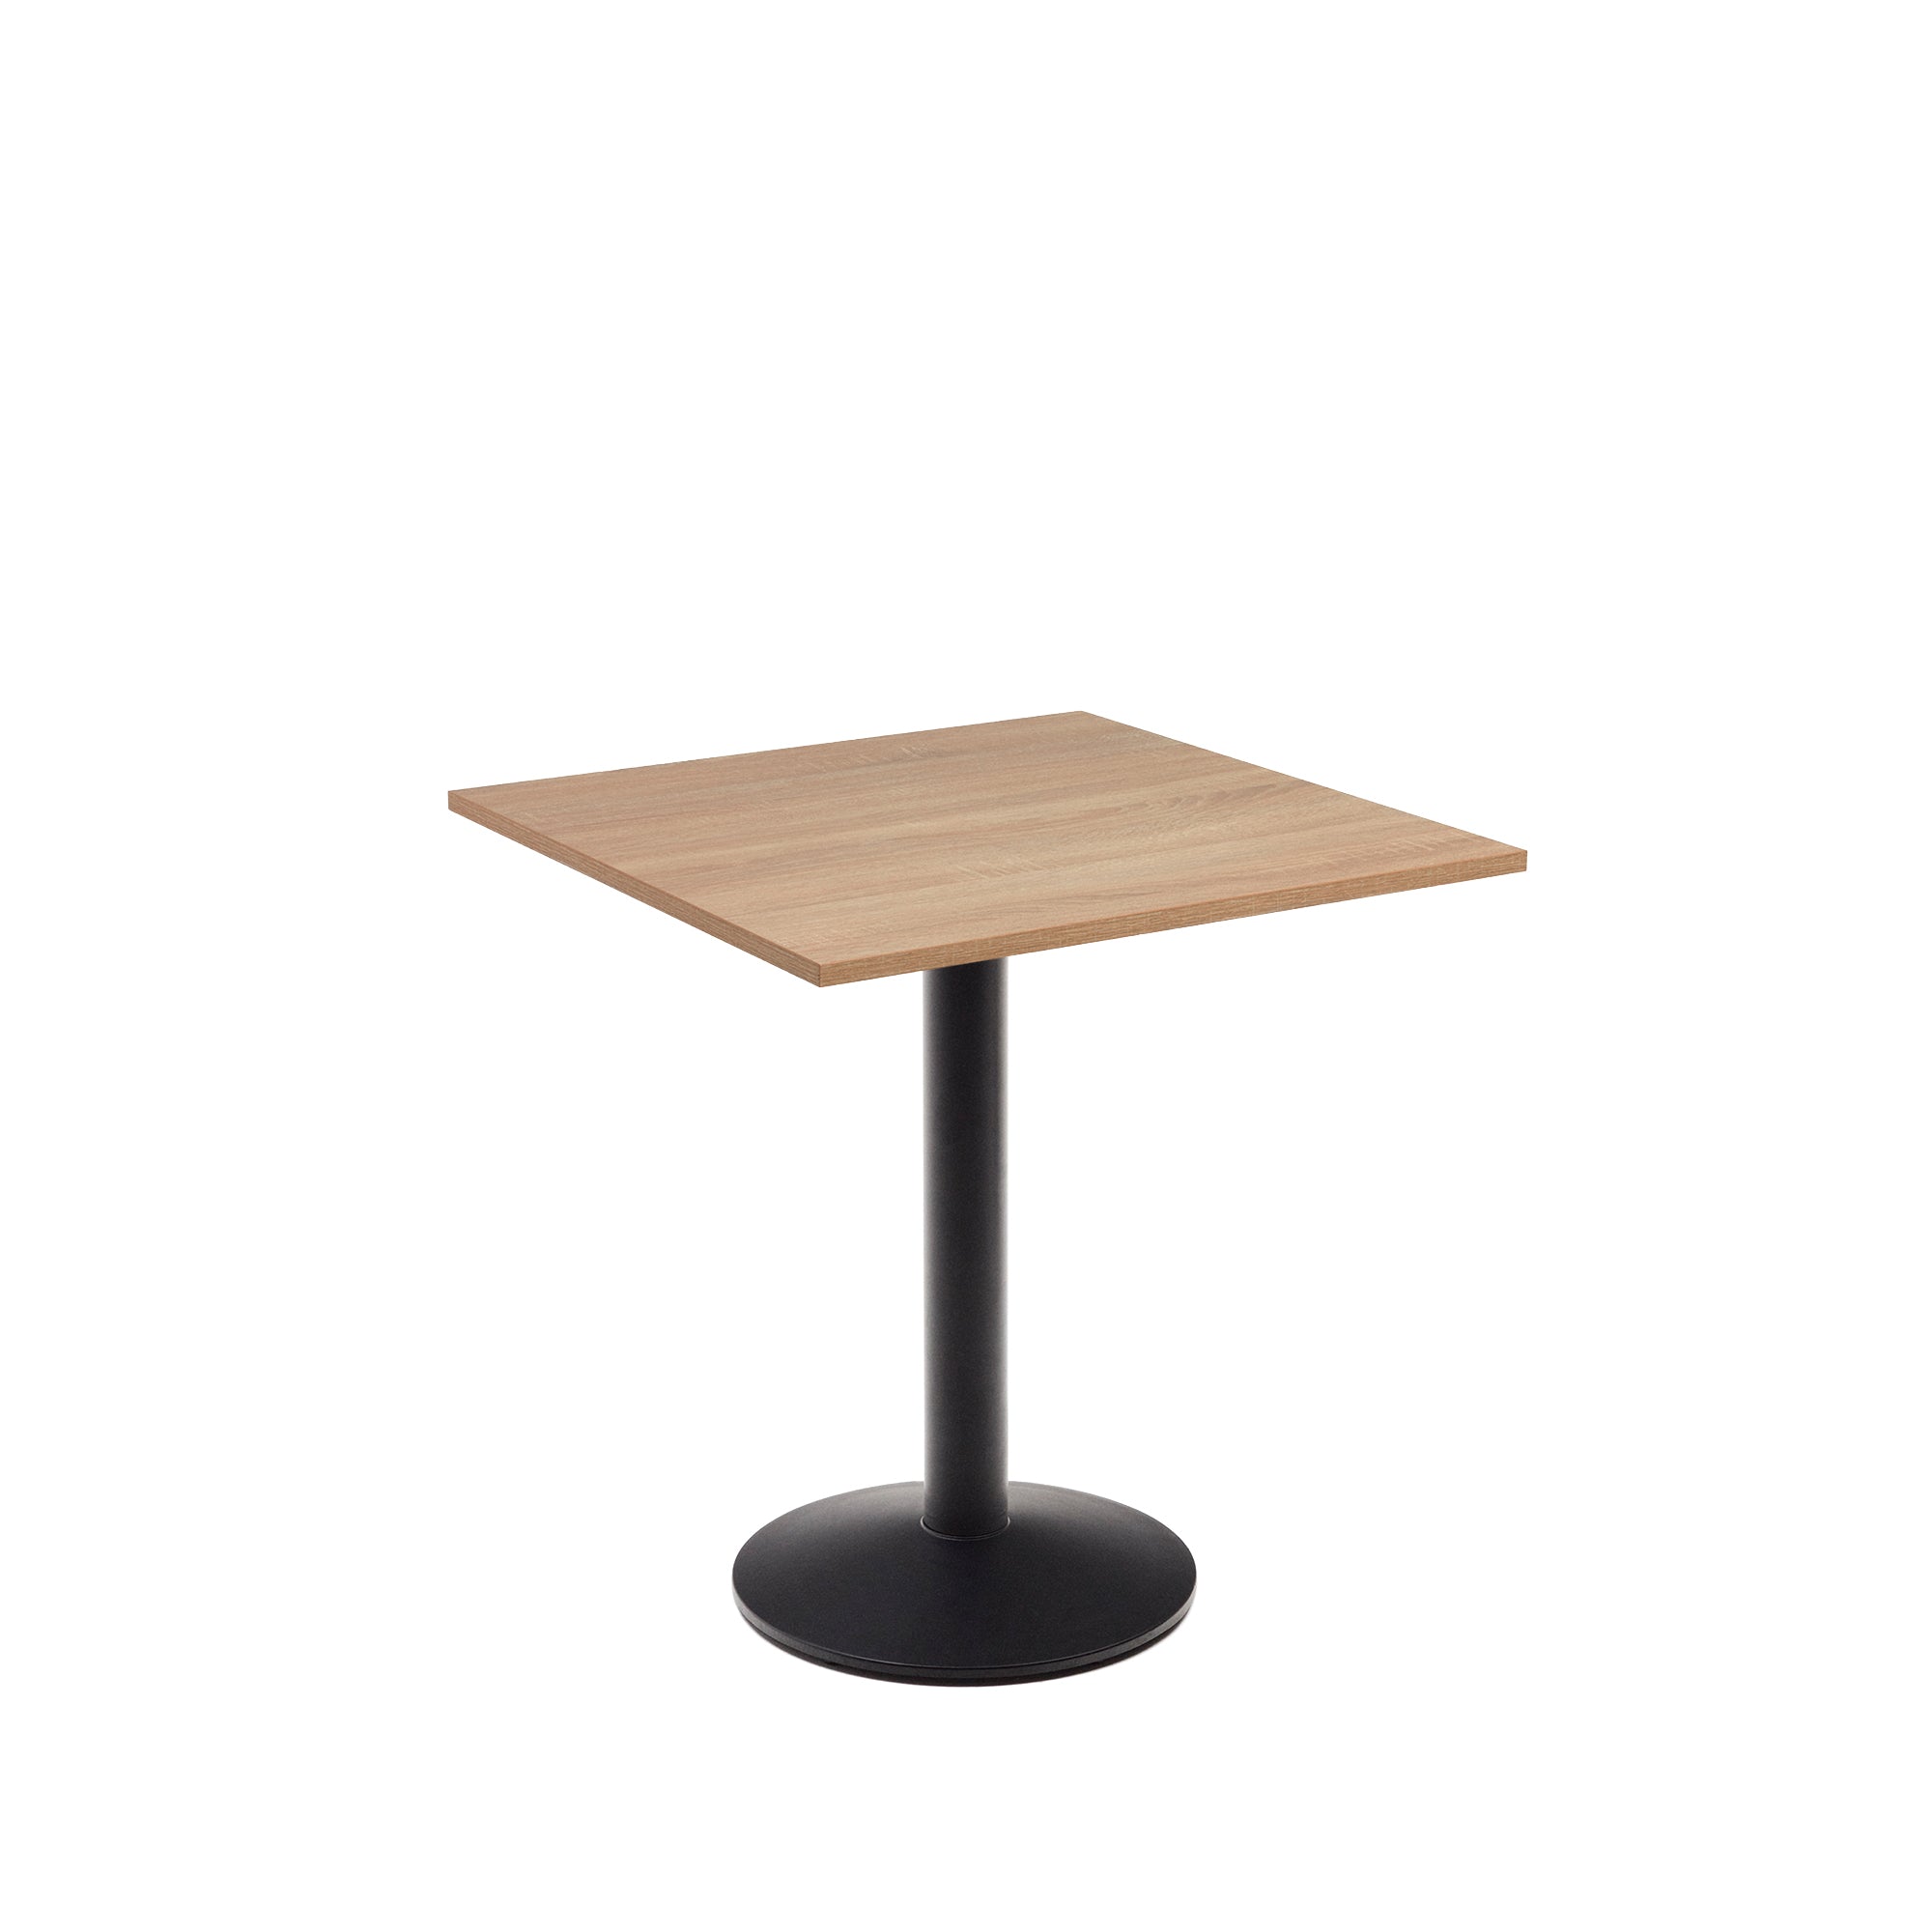 Esilda table in natural finish melamine with metal leg in a painted black finish, 70x70x70 cm